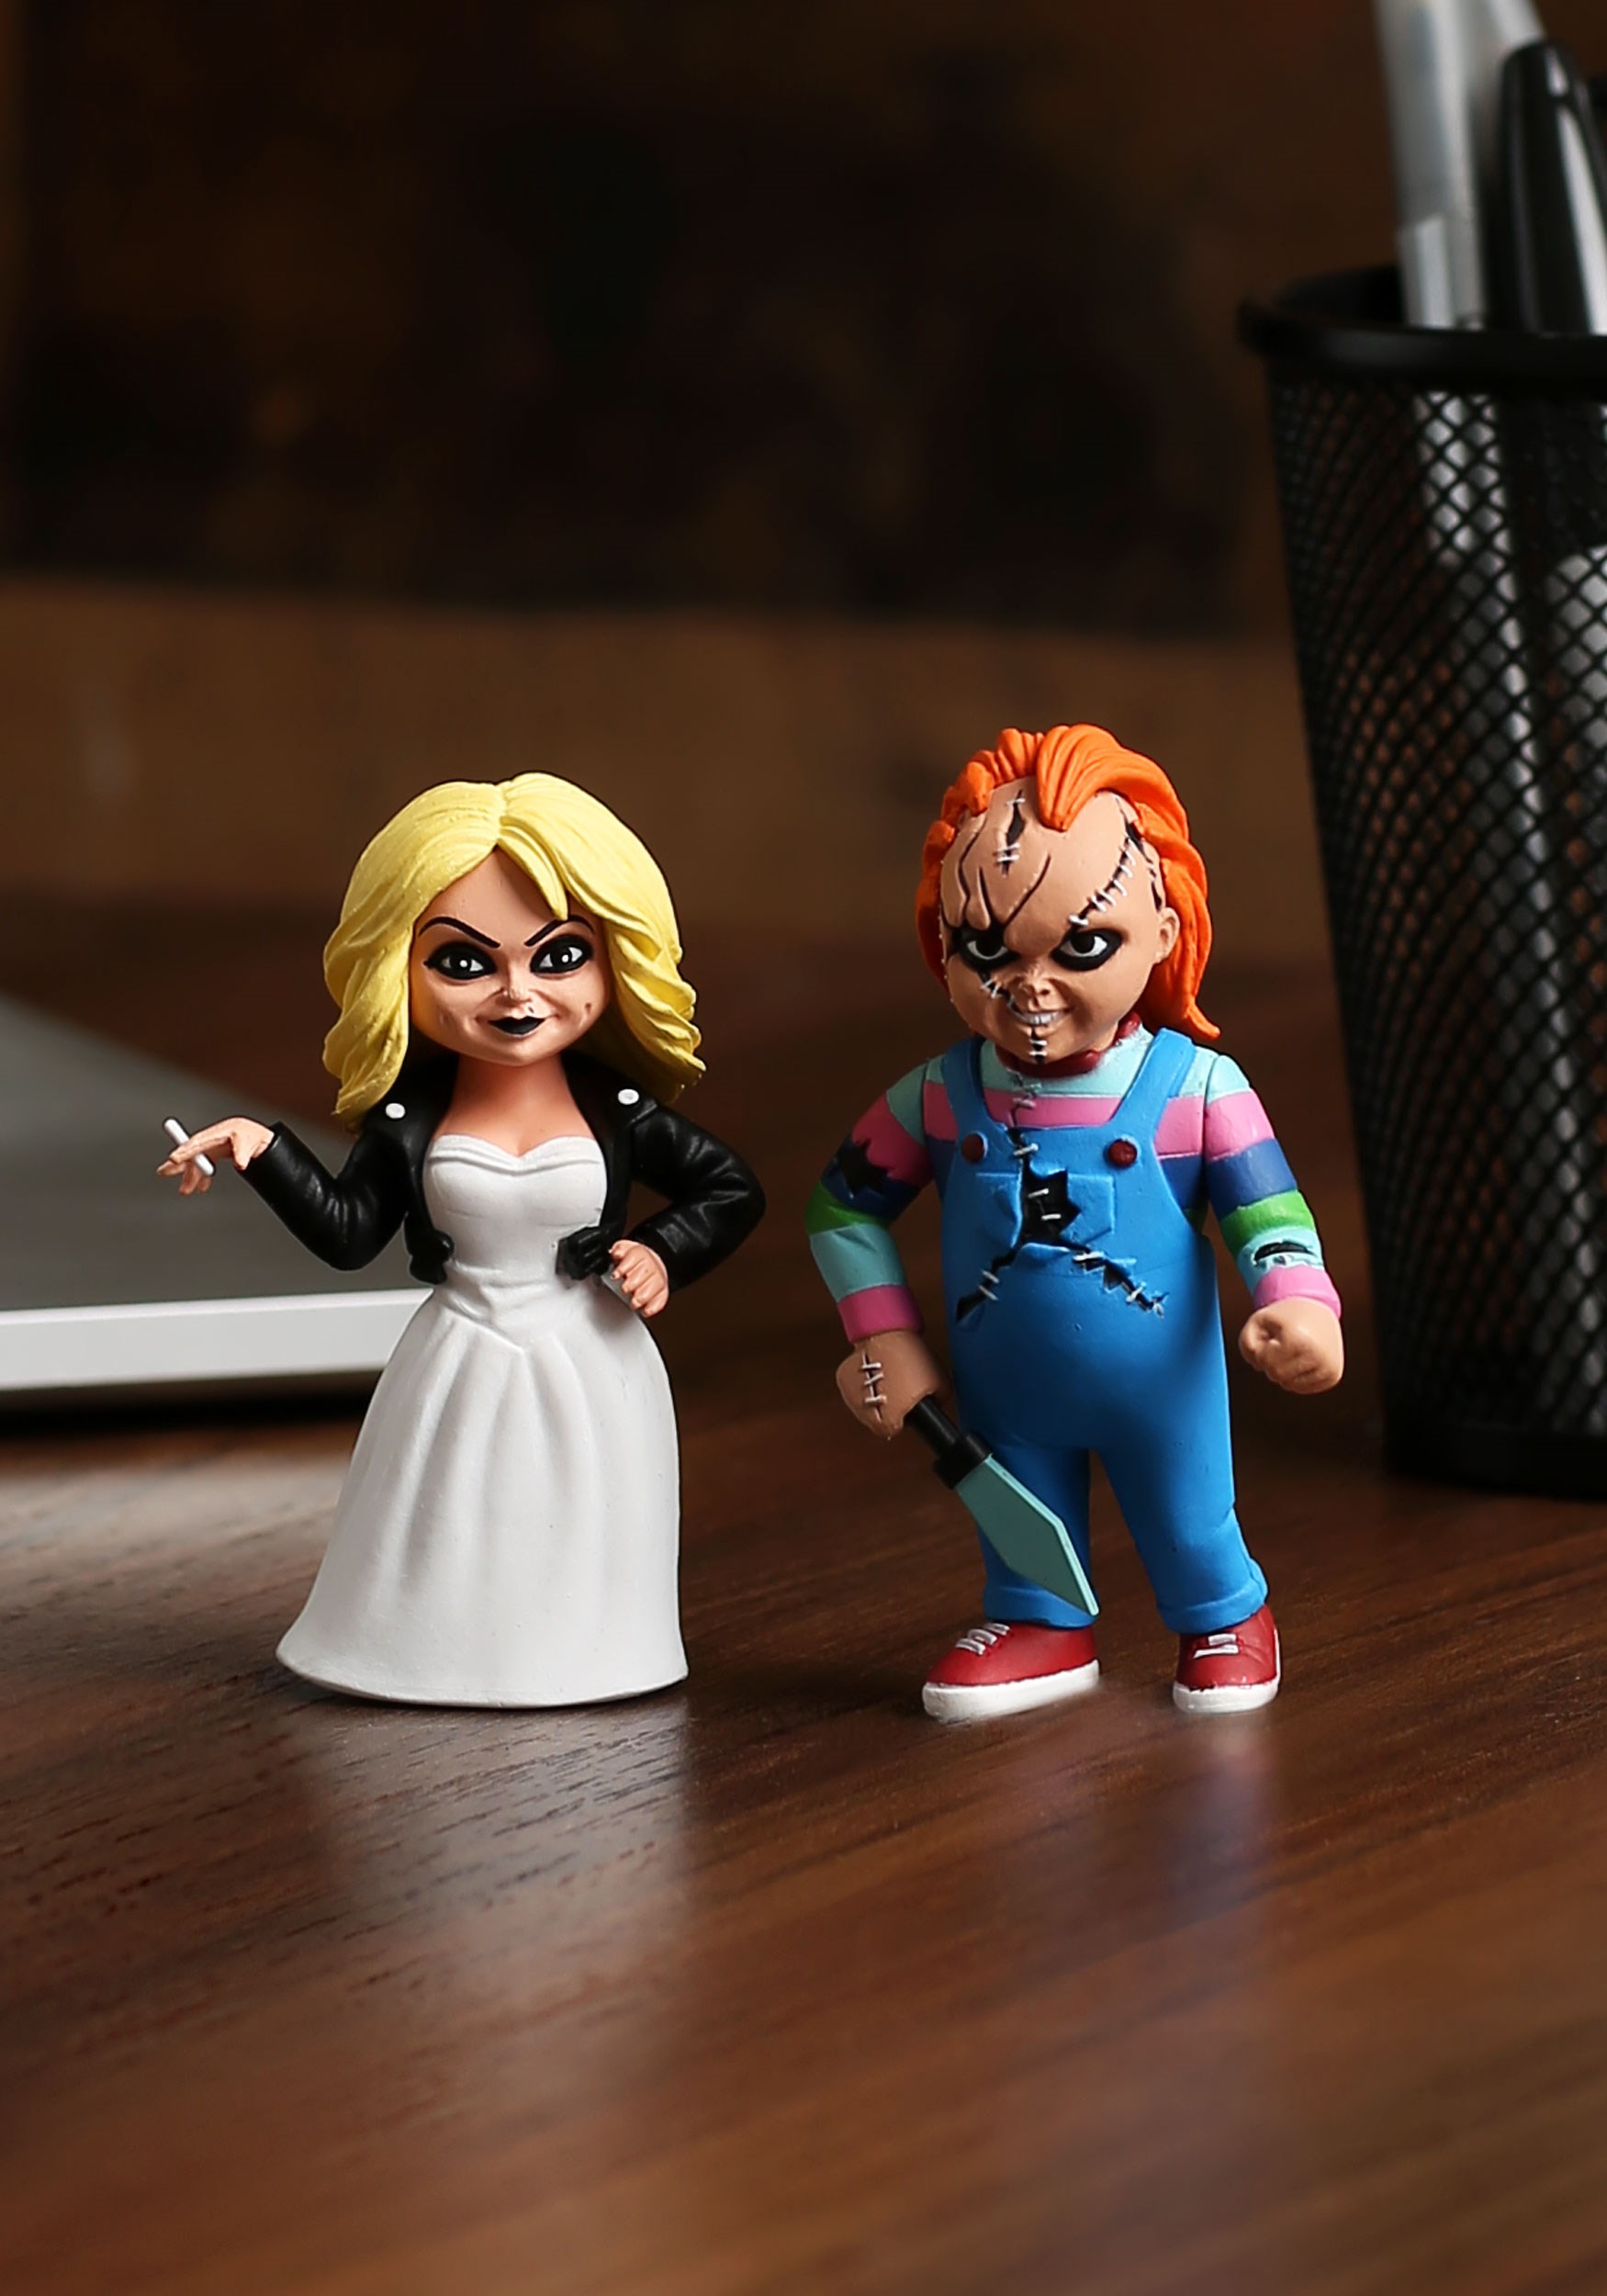 Toony Terrors 3" Bride of Chucky Action Figure 2 Pack